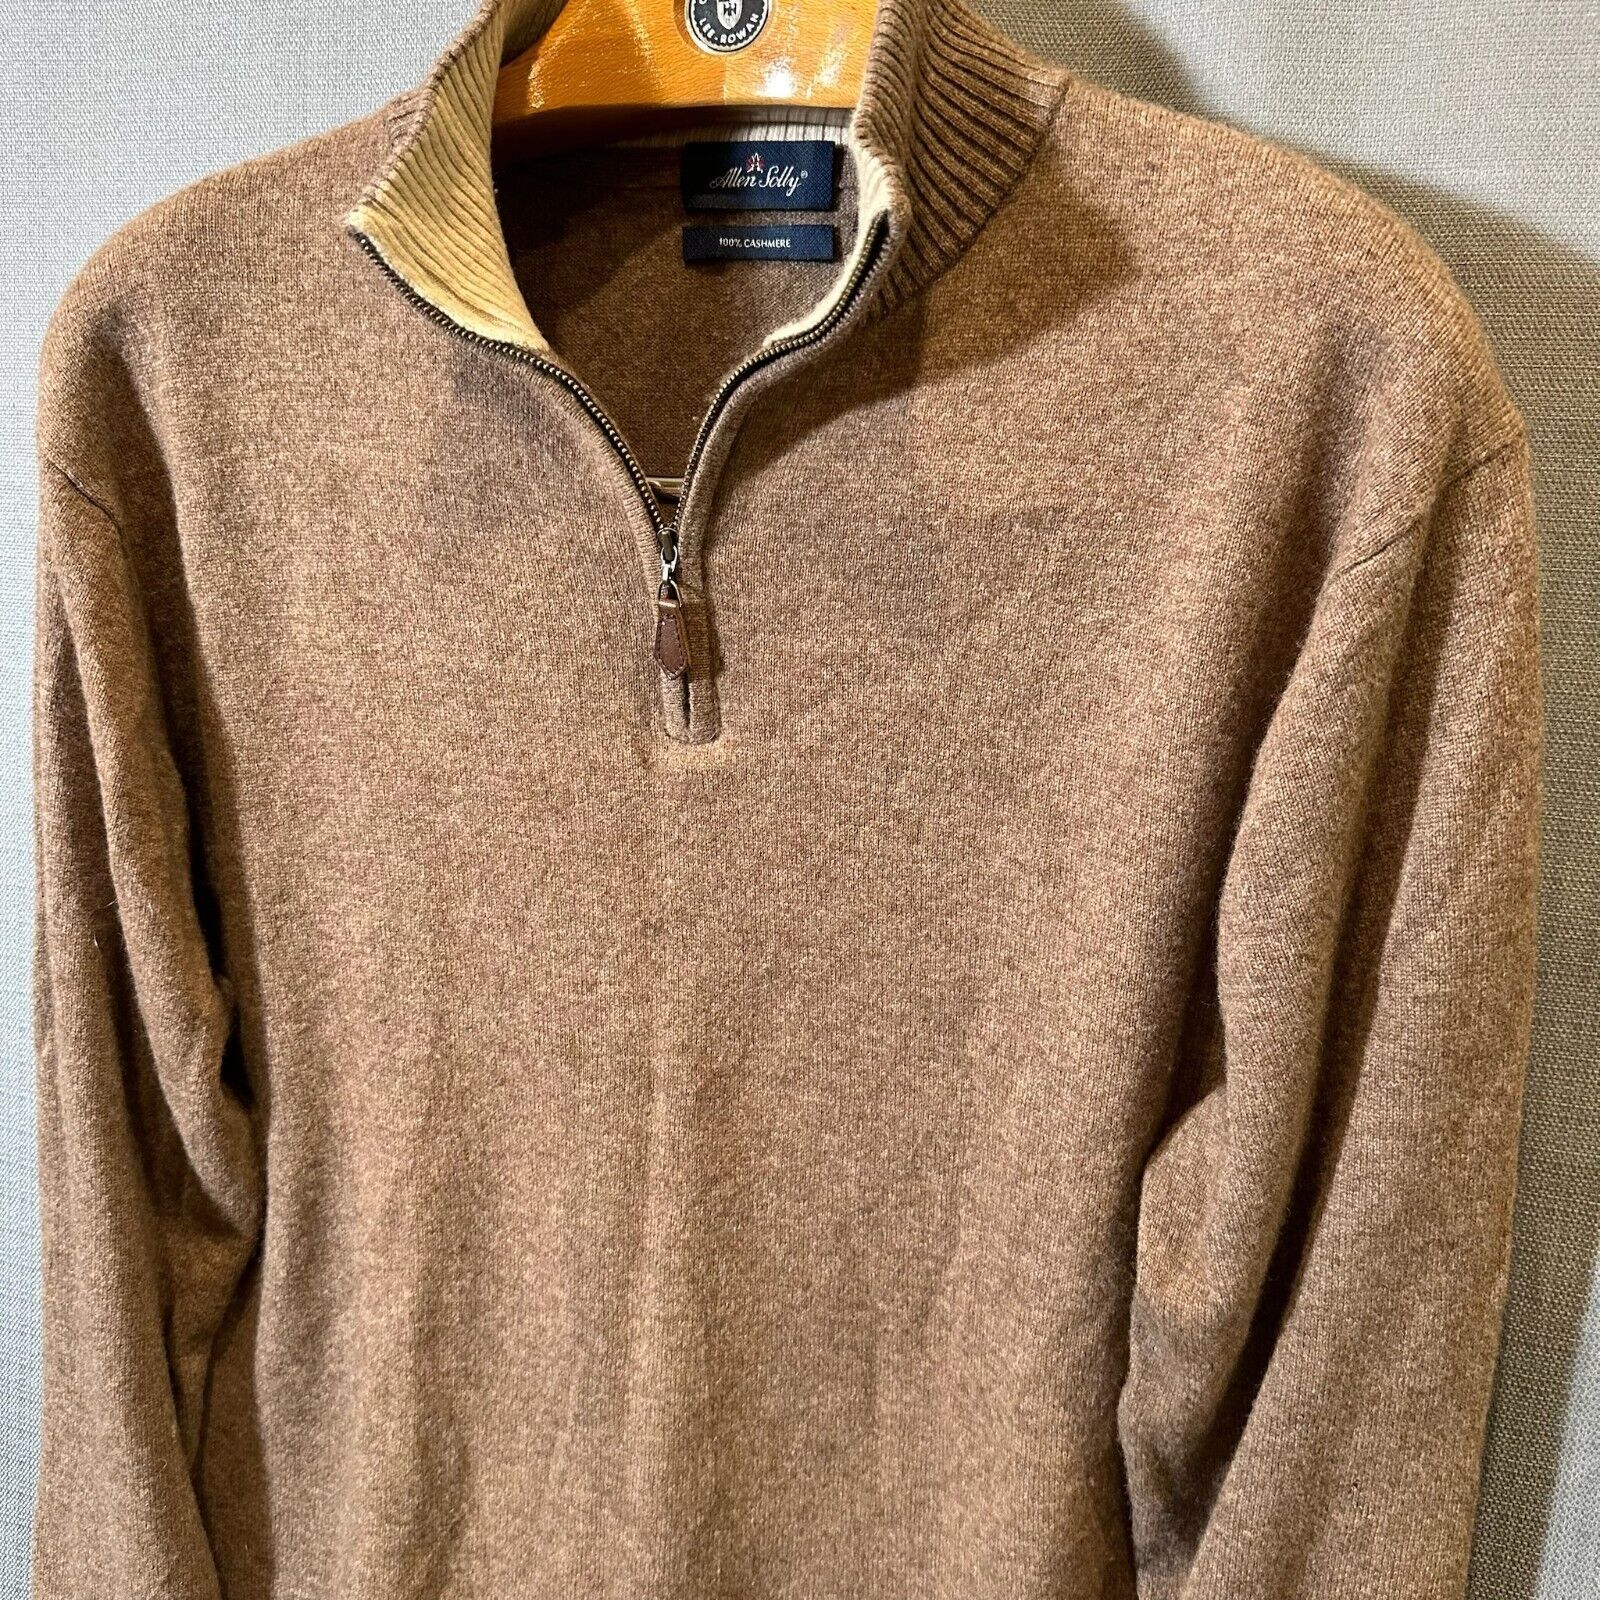 Primary image for Allen Sully Cashmere Sweater Mens Extra Large Brown 1/4 Zip Pullover Preppy